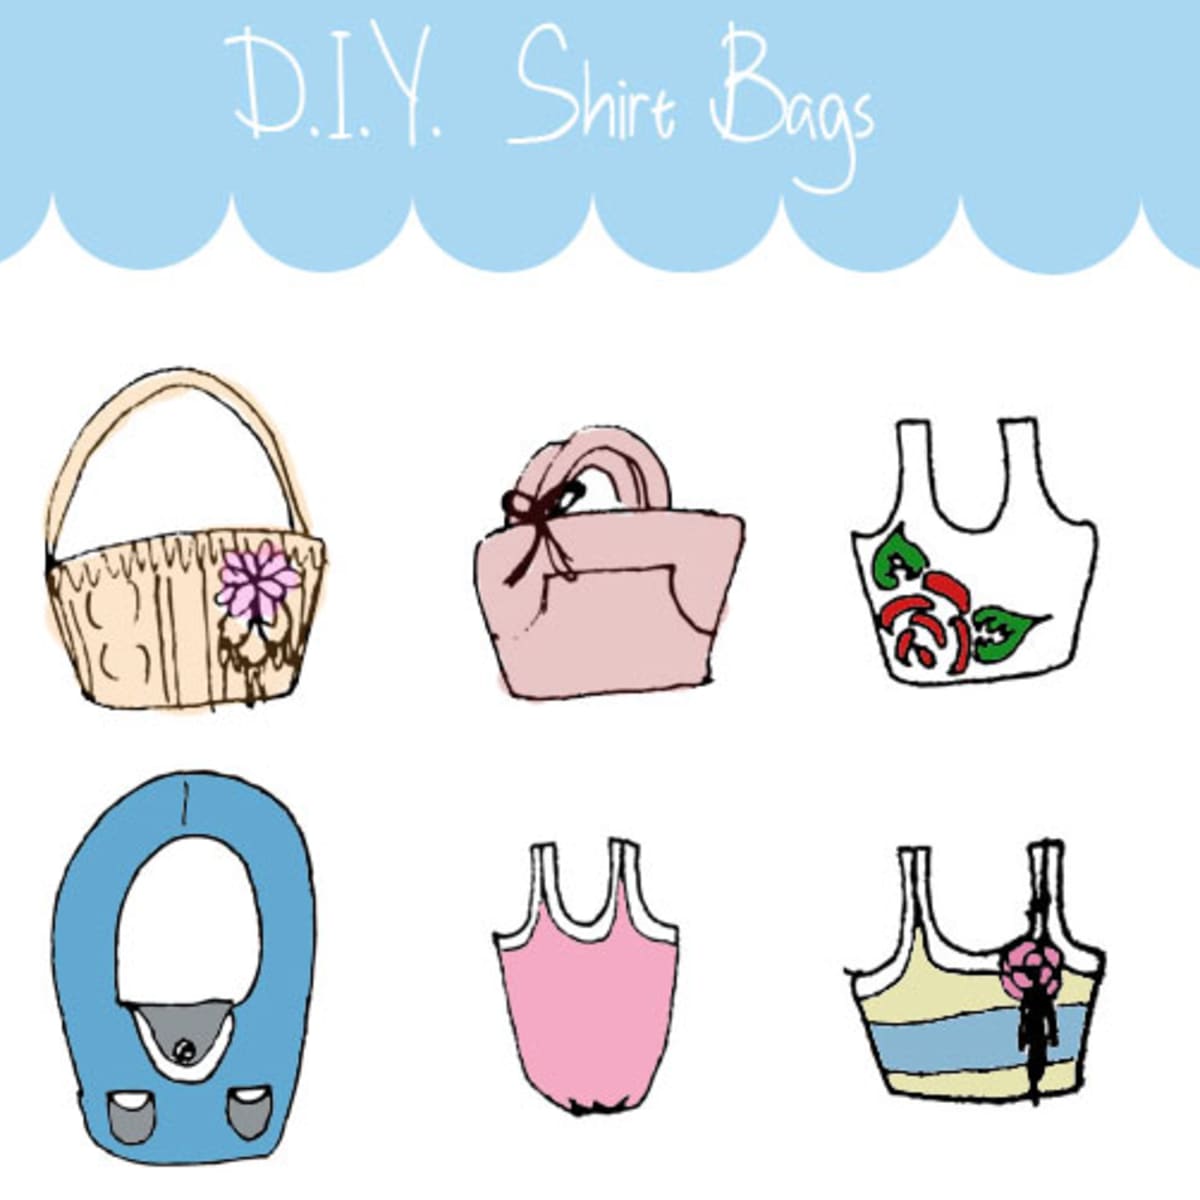 Make Your Own Homemade Bag From Old Clothes - FeltMagnet